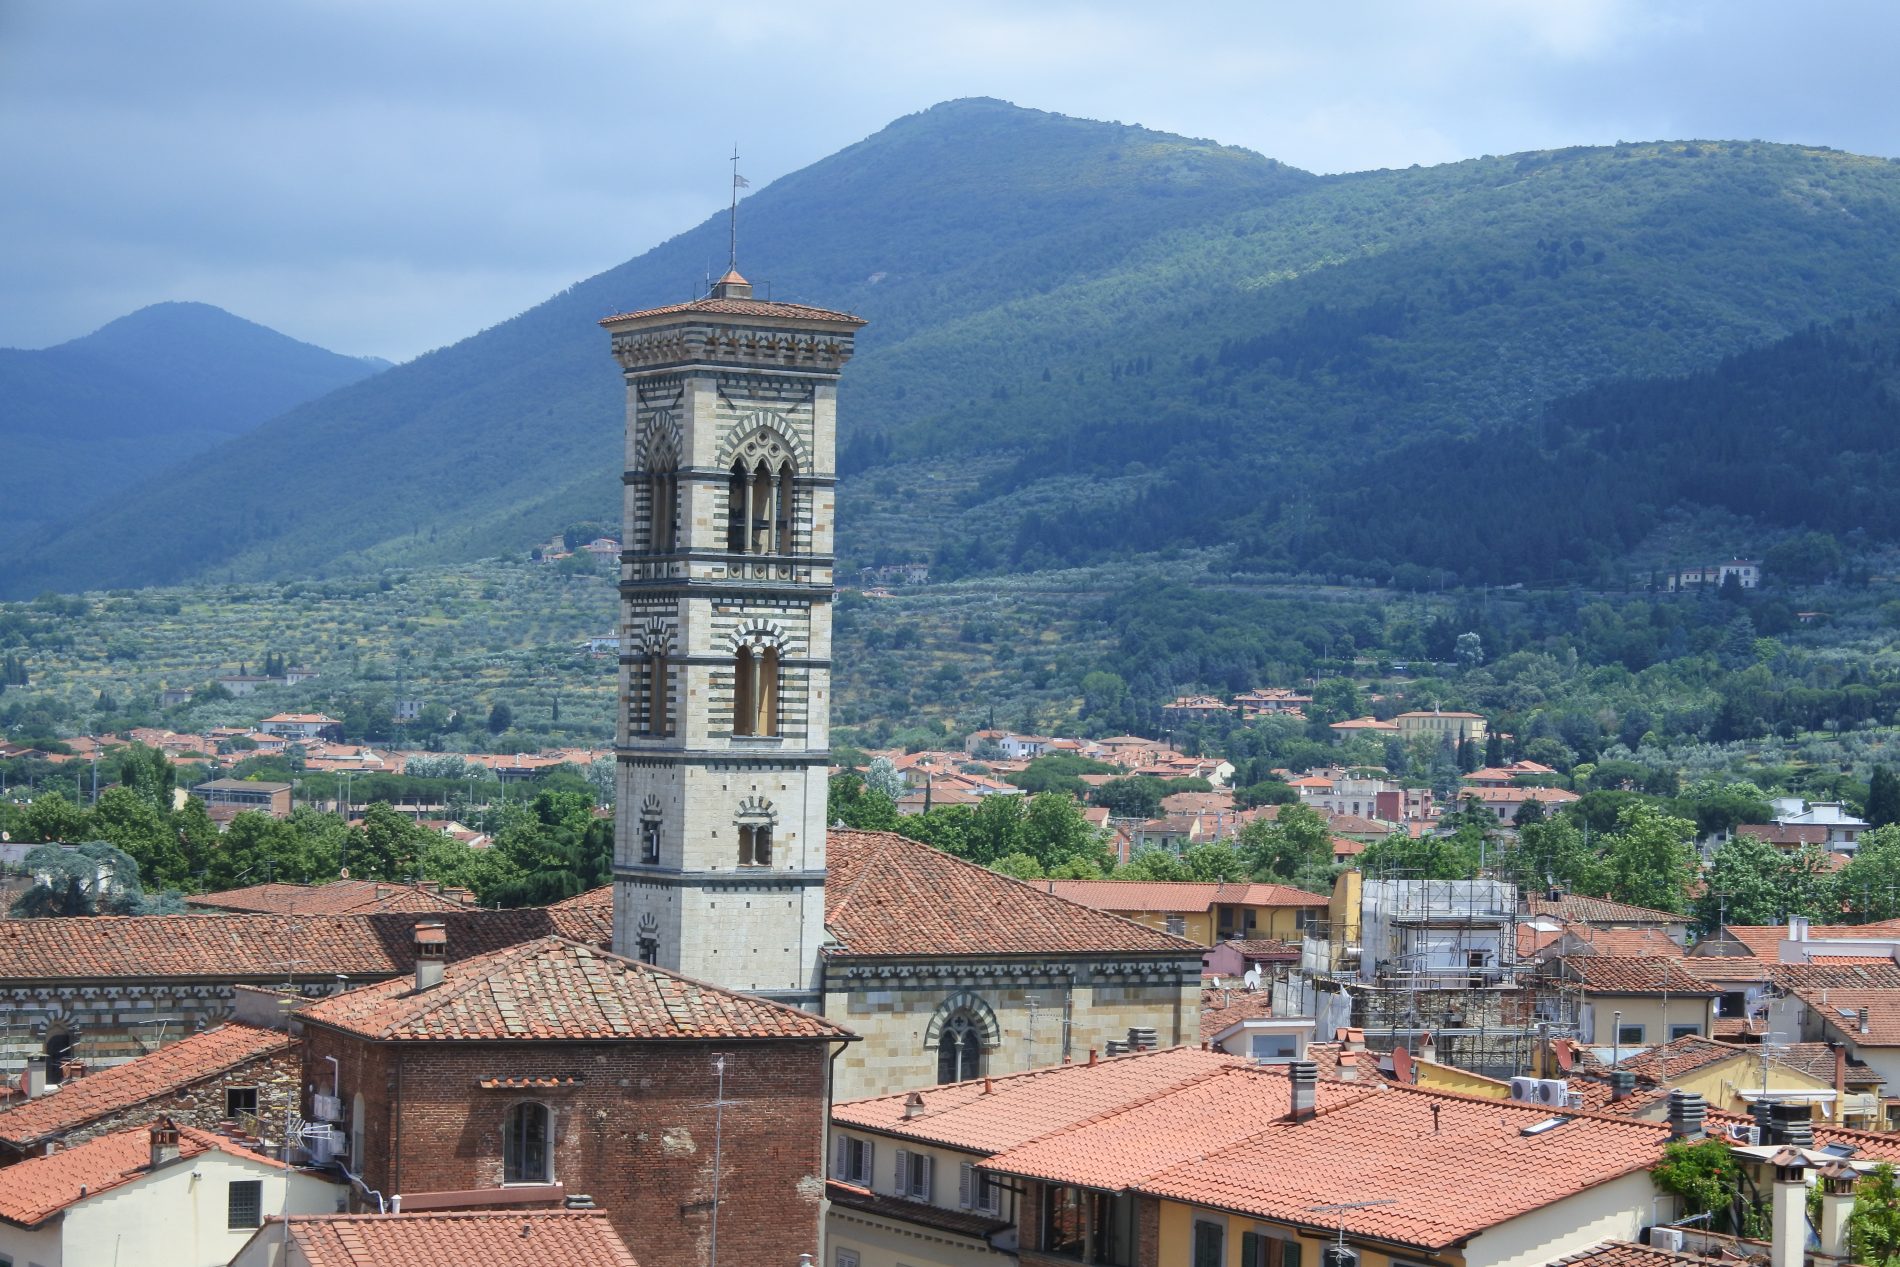 Discovering Prato and its hidden secrets